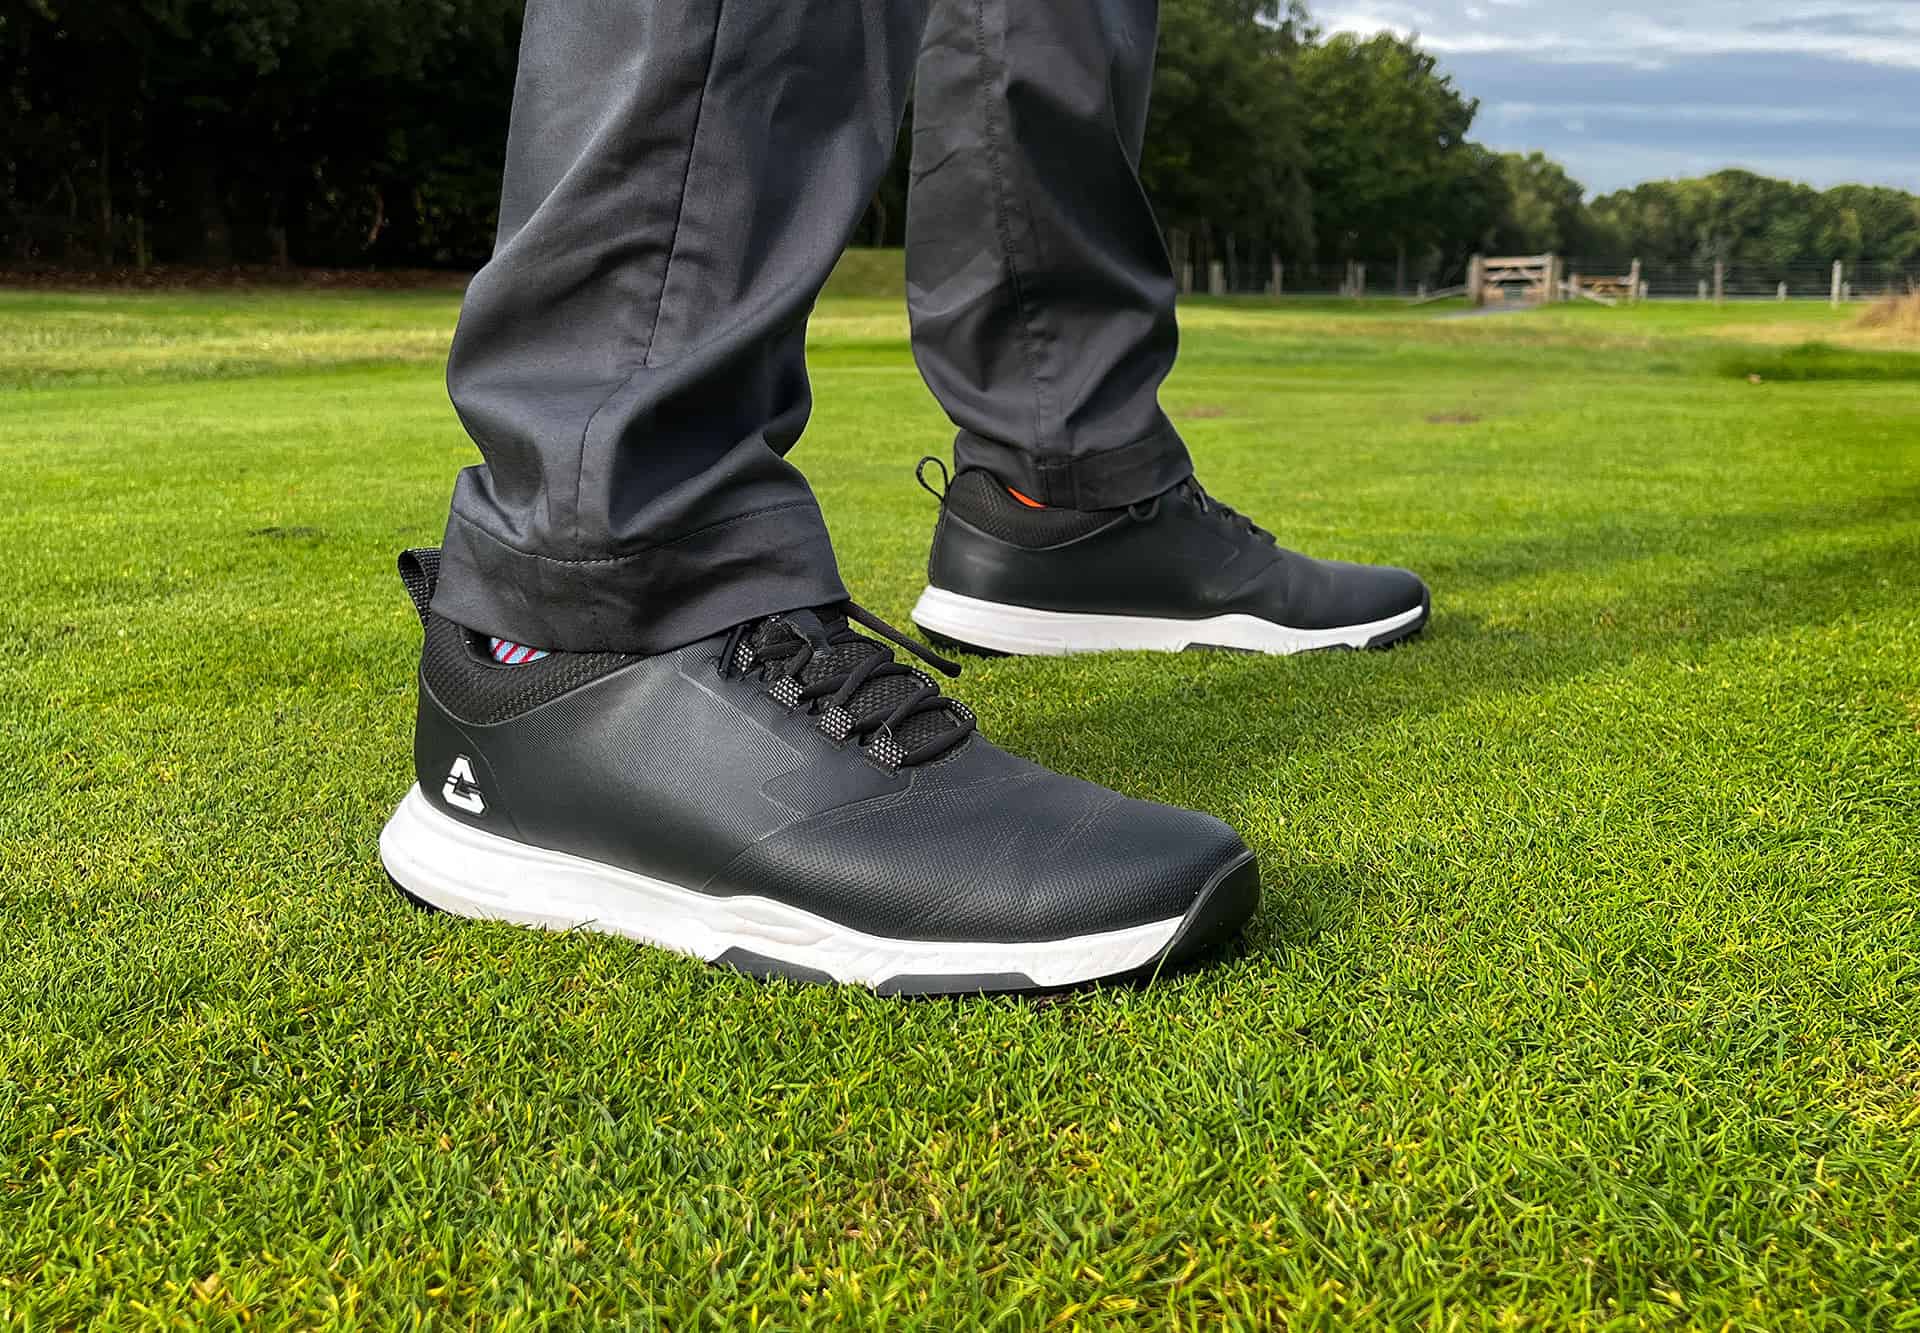 Cuater The Ringer golf shoes review